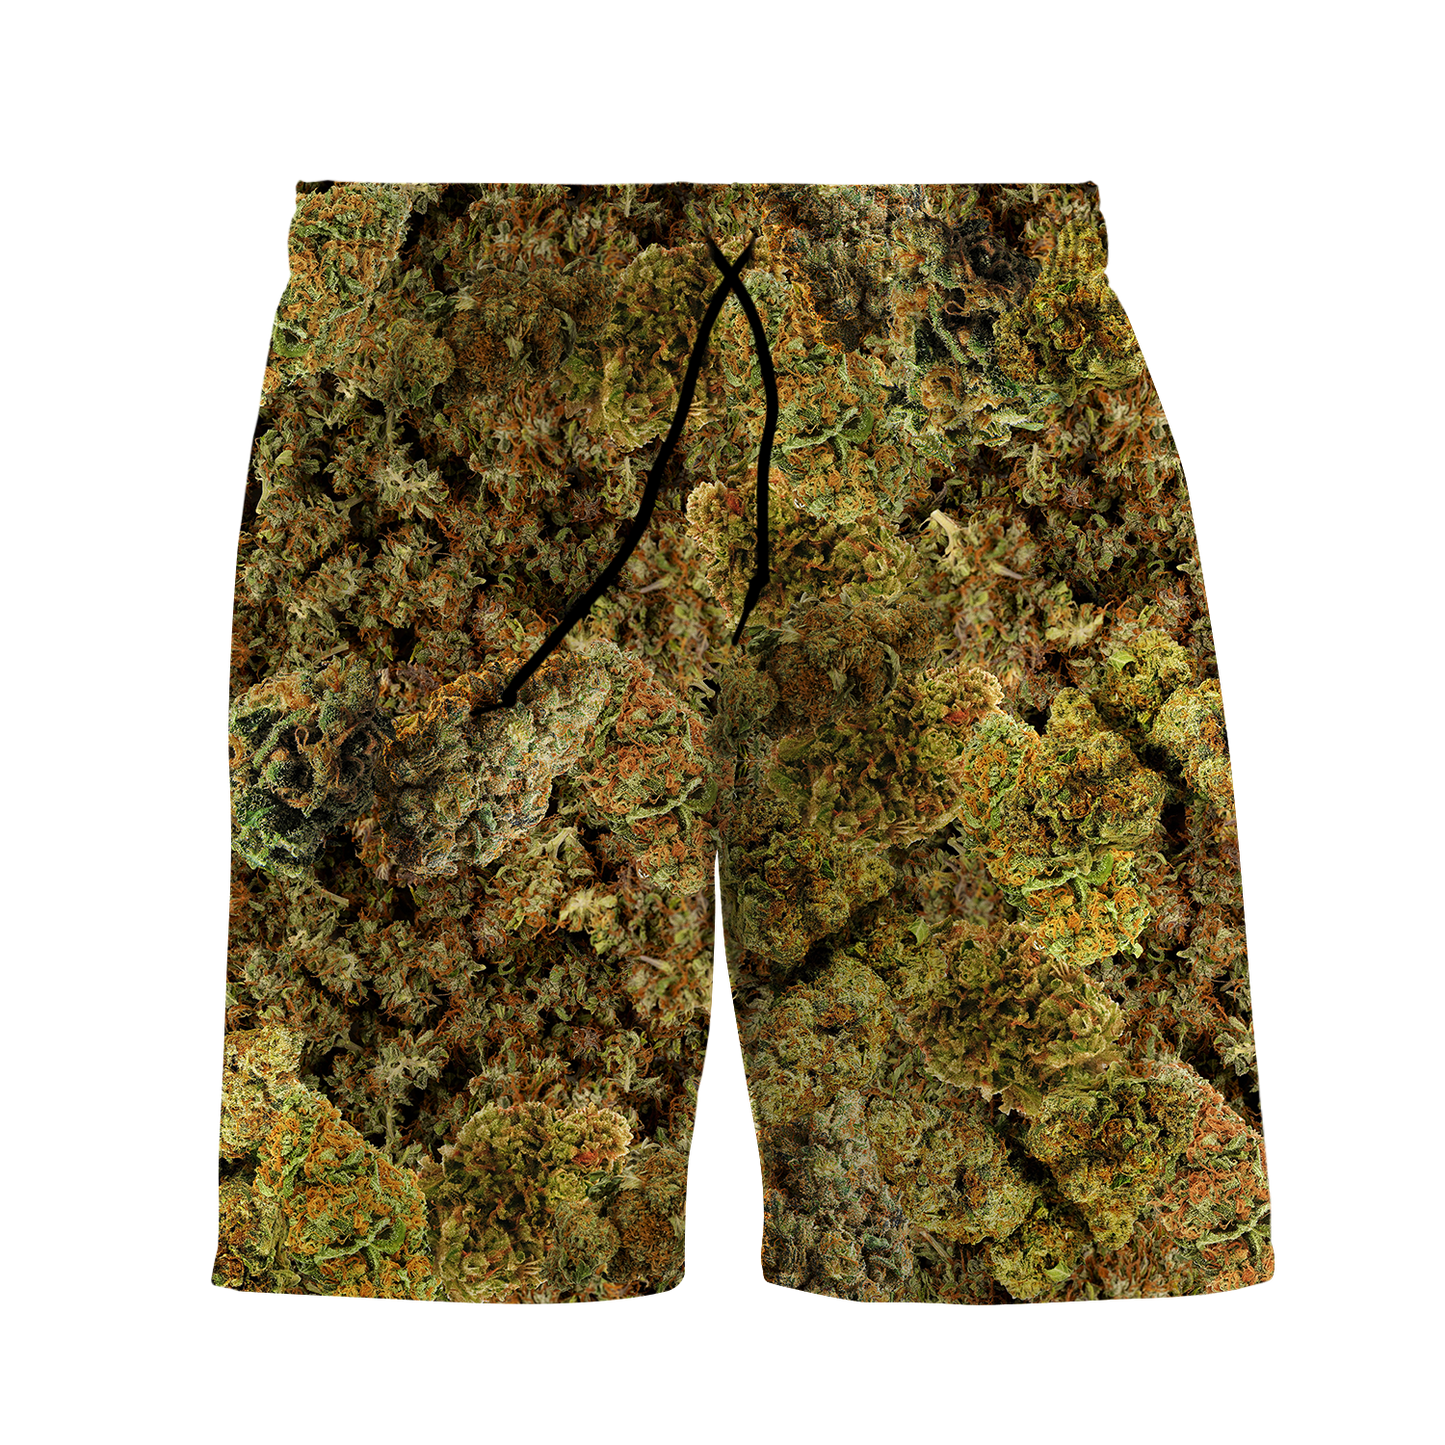 Cann~ Buds All Over Print Men's Shorts